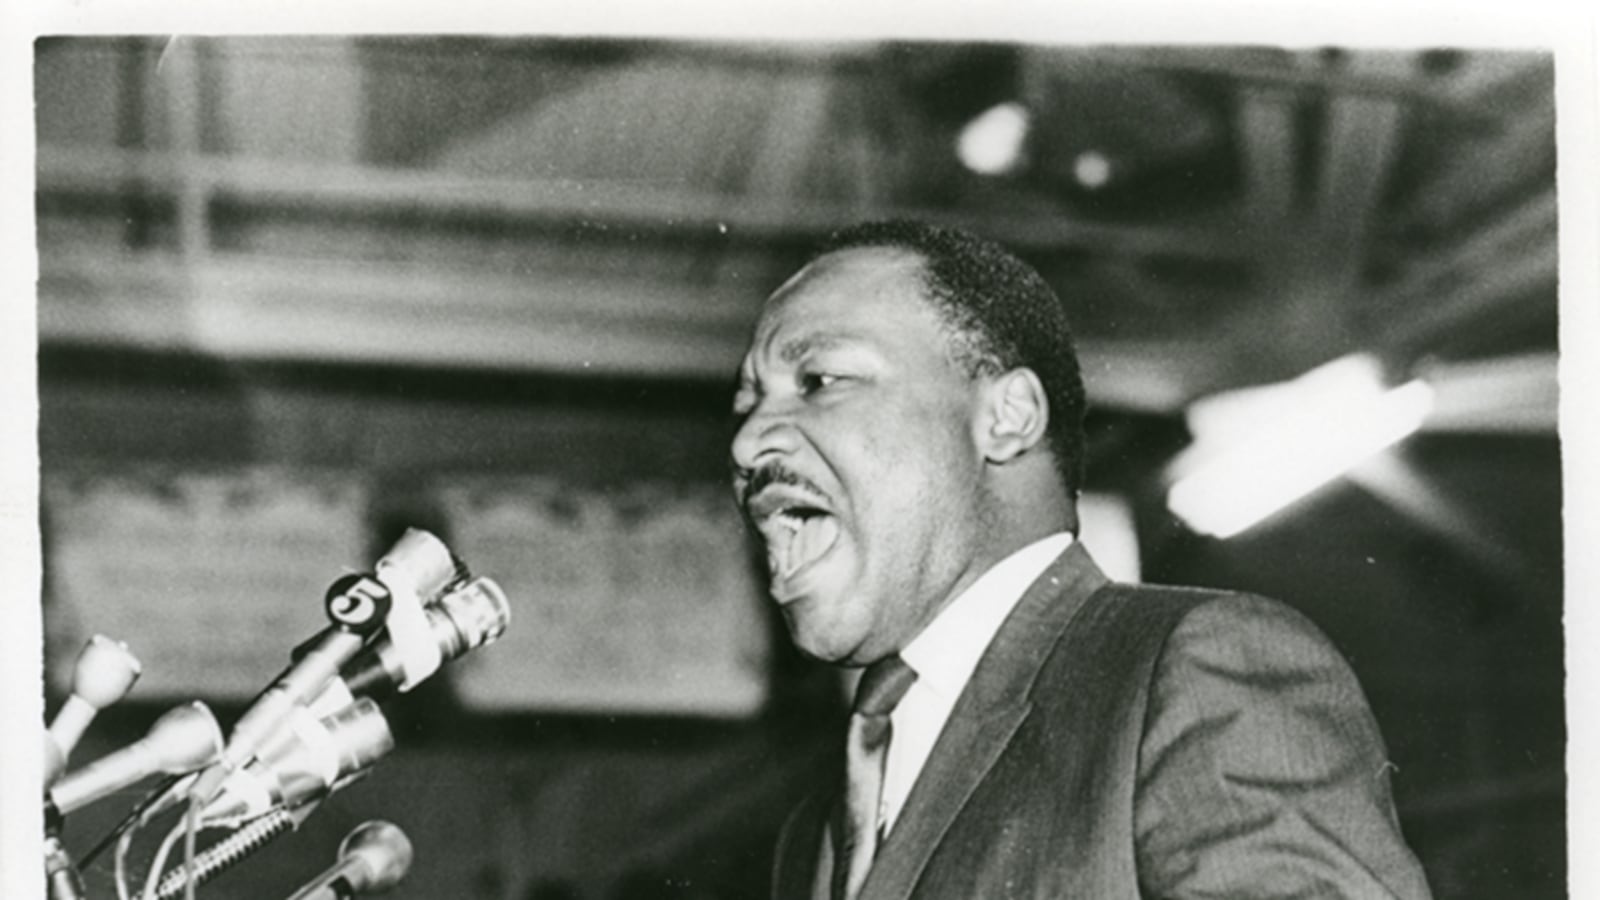 The Rev. Martin Luther King Jr. speaks to a mass rally in Memphis on April 3, 1968, one day before his assassination.